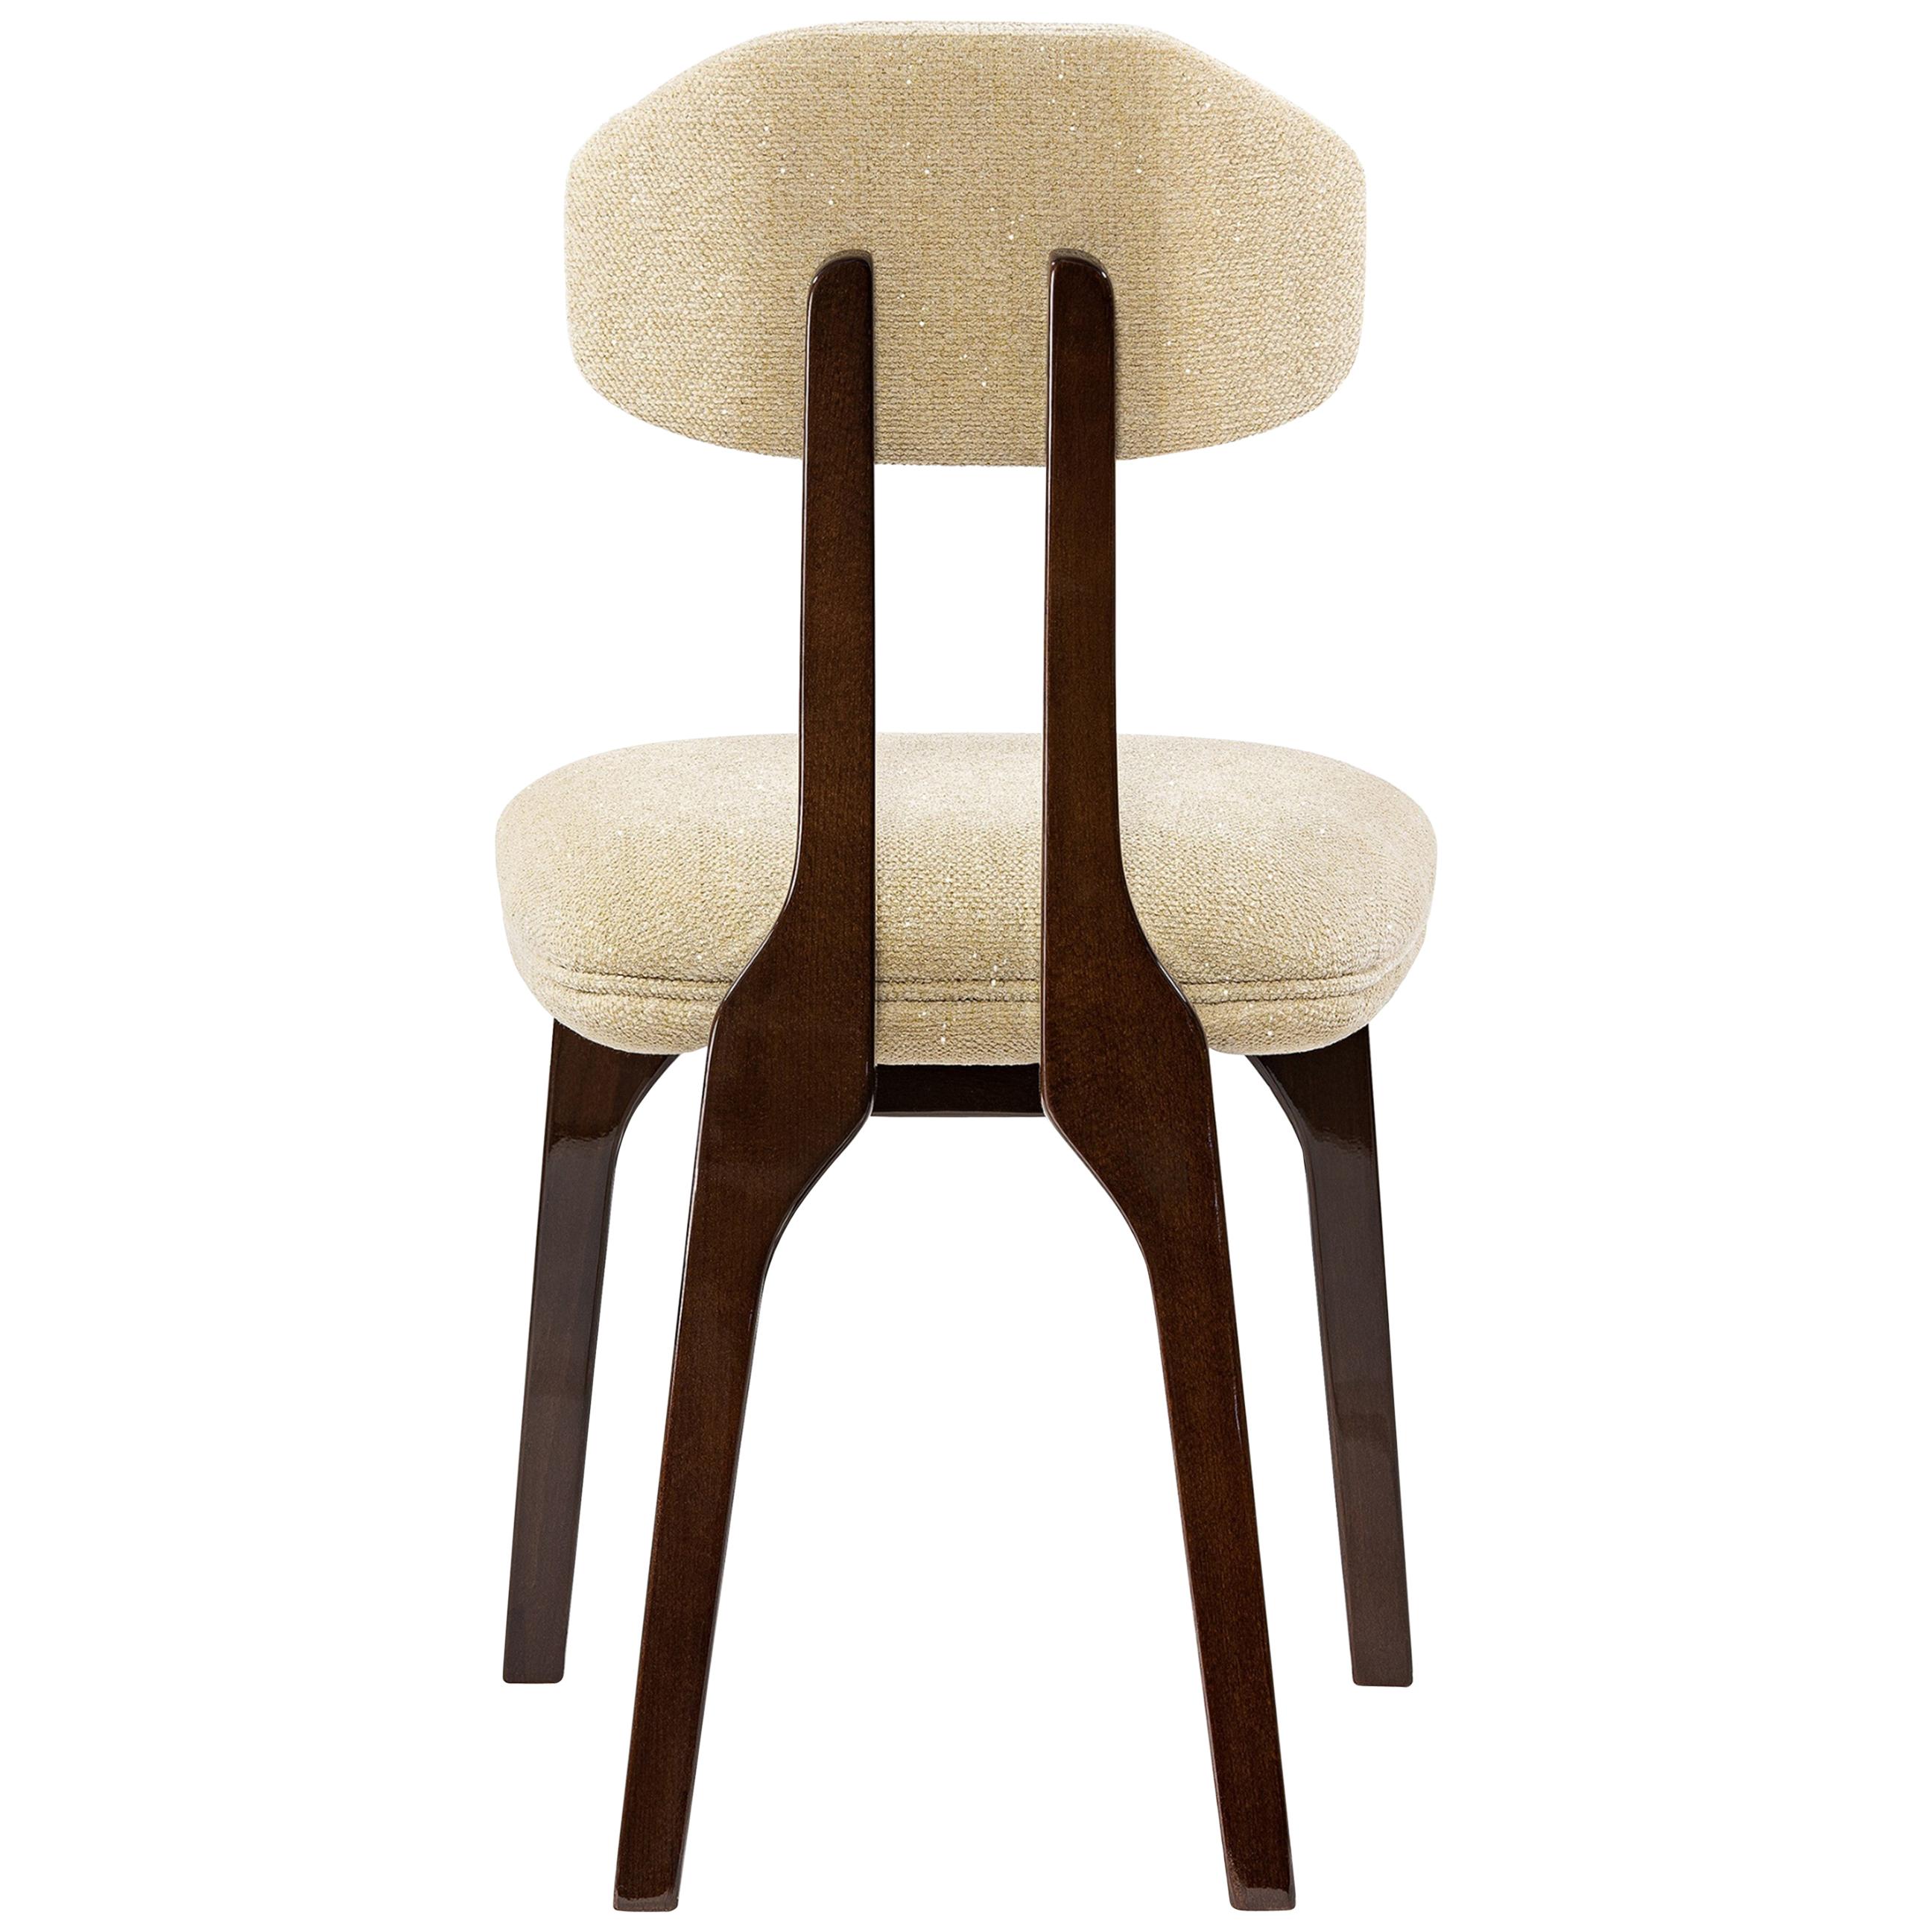 Silhouette Dining Chair, Translucent Brown, InsidherLand by Joana Santos Barbosa